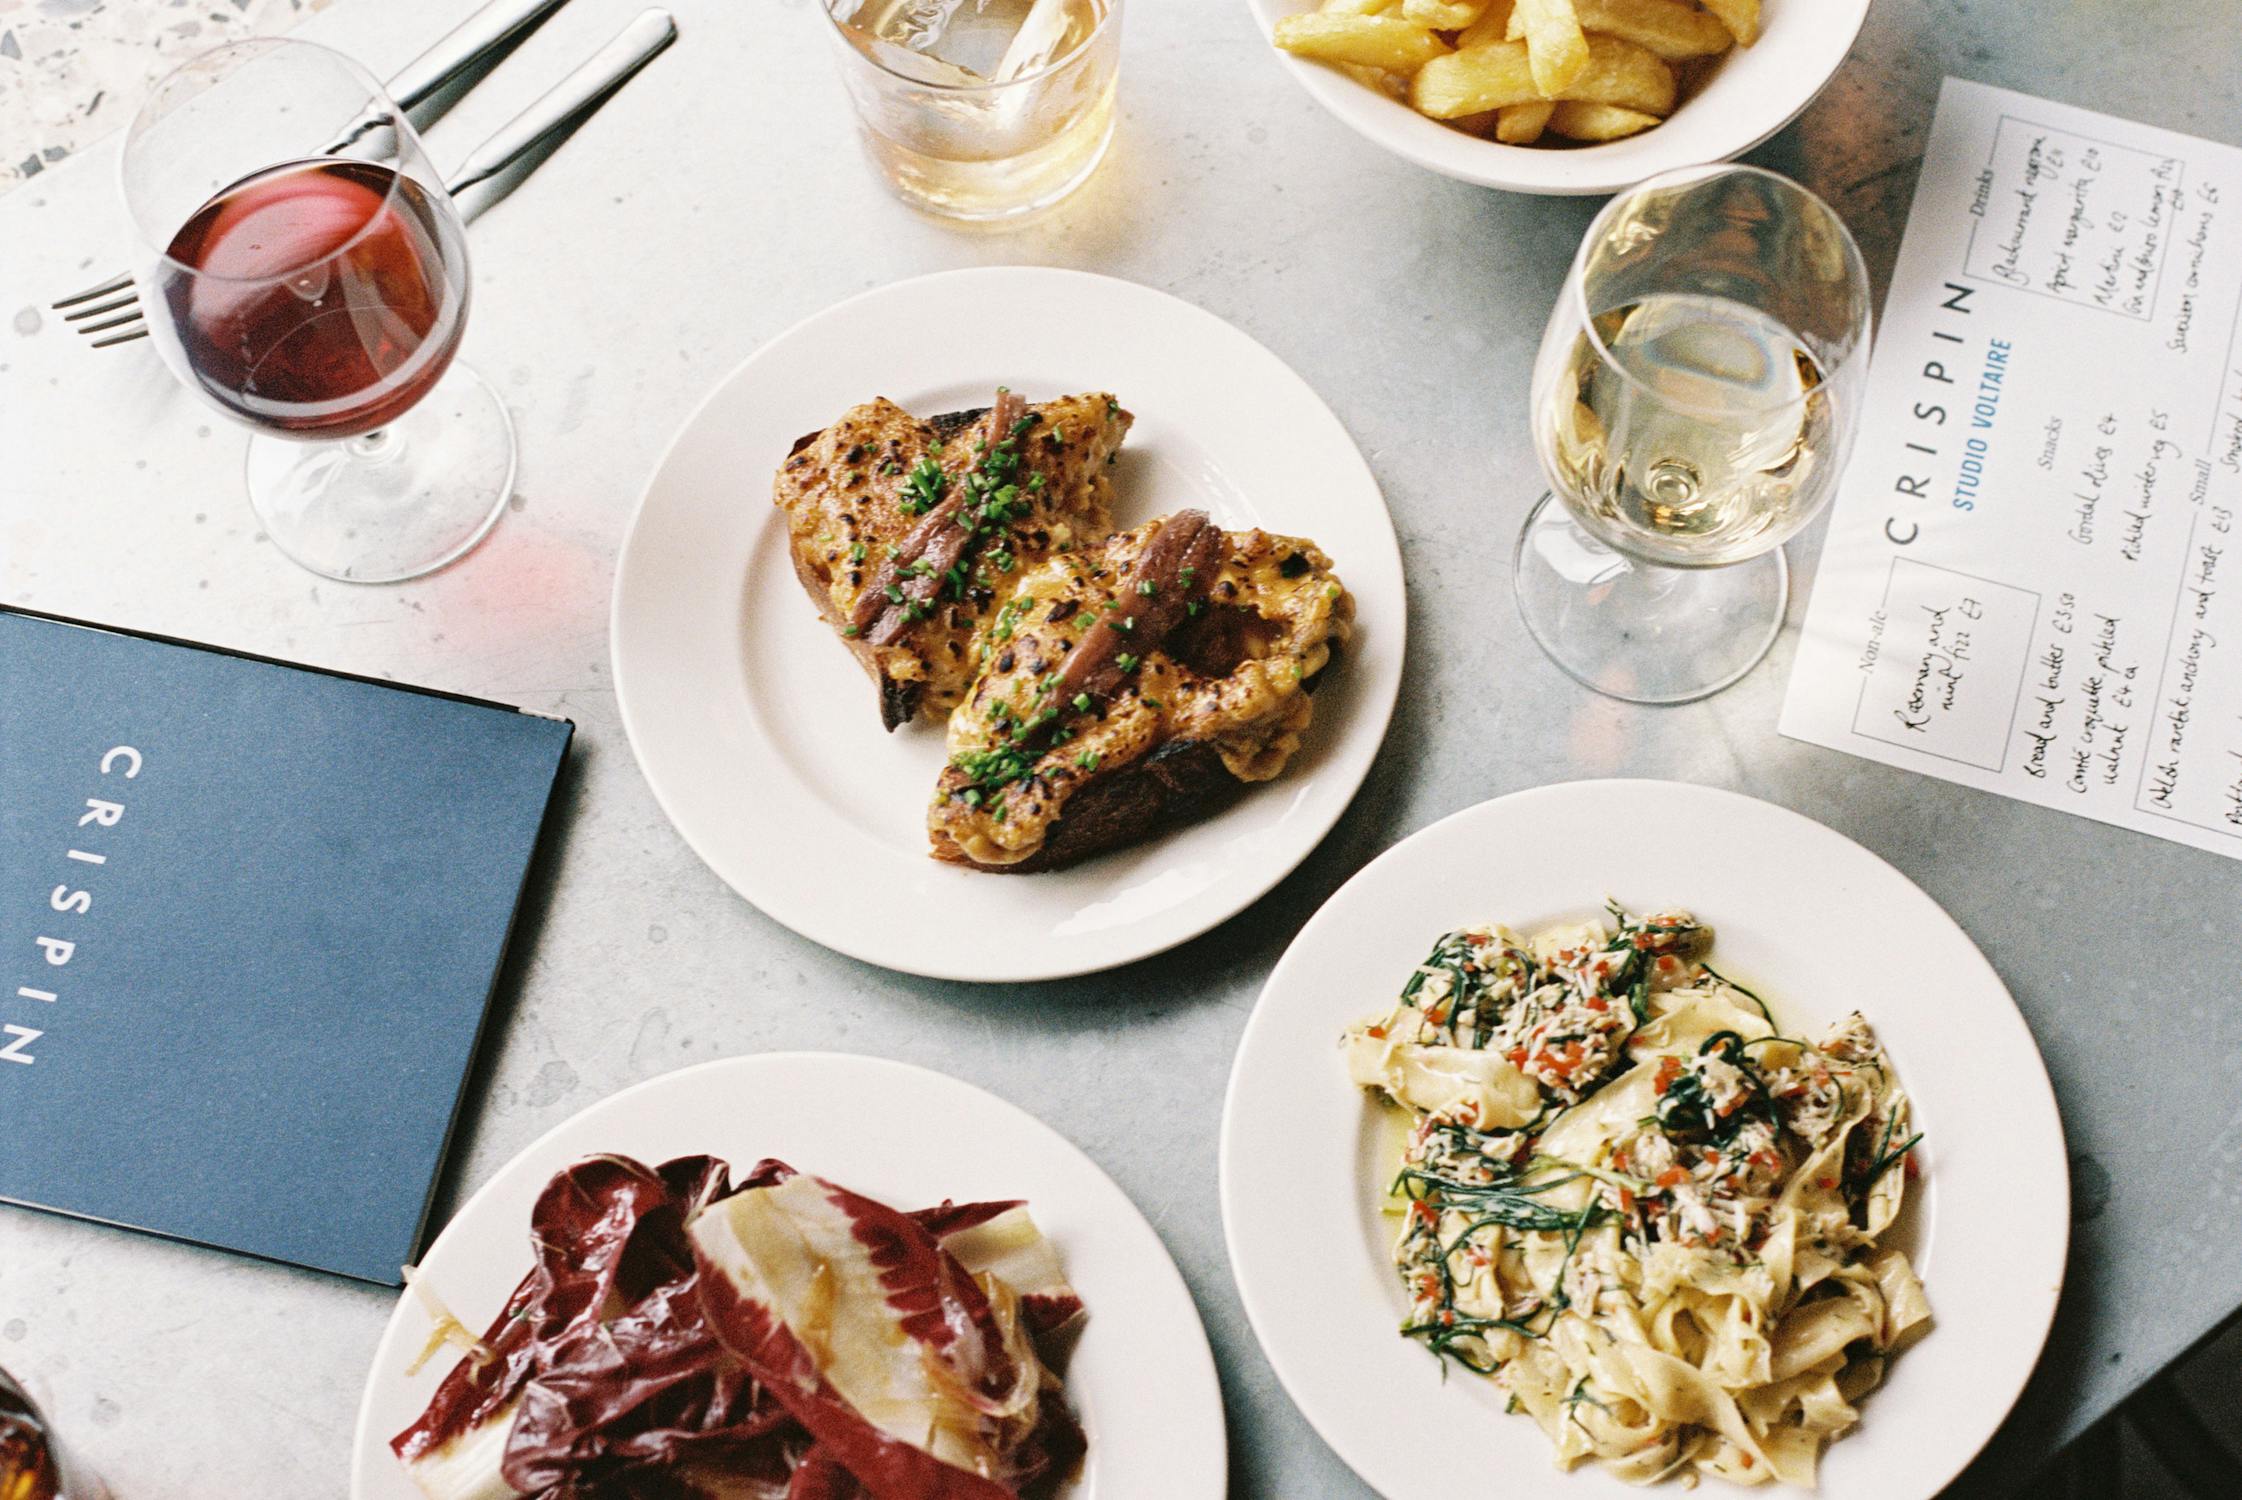 A photograph of spread of freshly prepared restuarat food on white plates, including a creamy pasta dish, dressed leaves, and glasses or red and white wine.